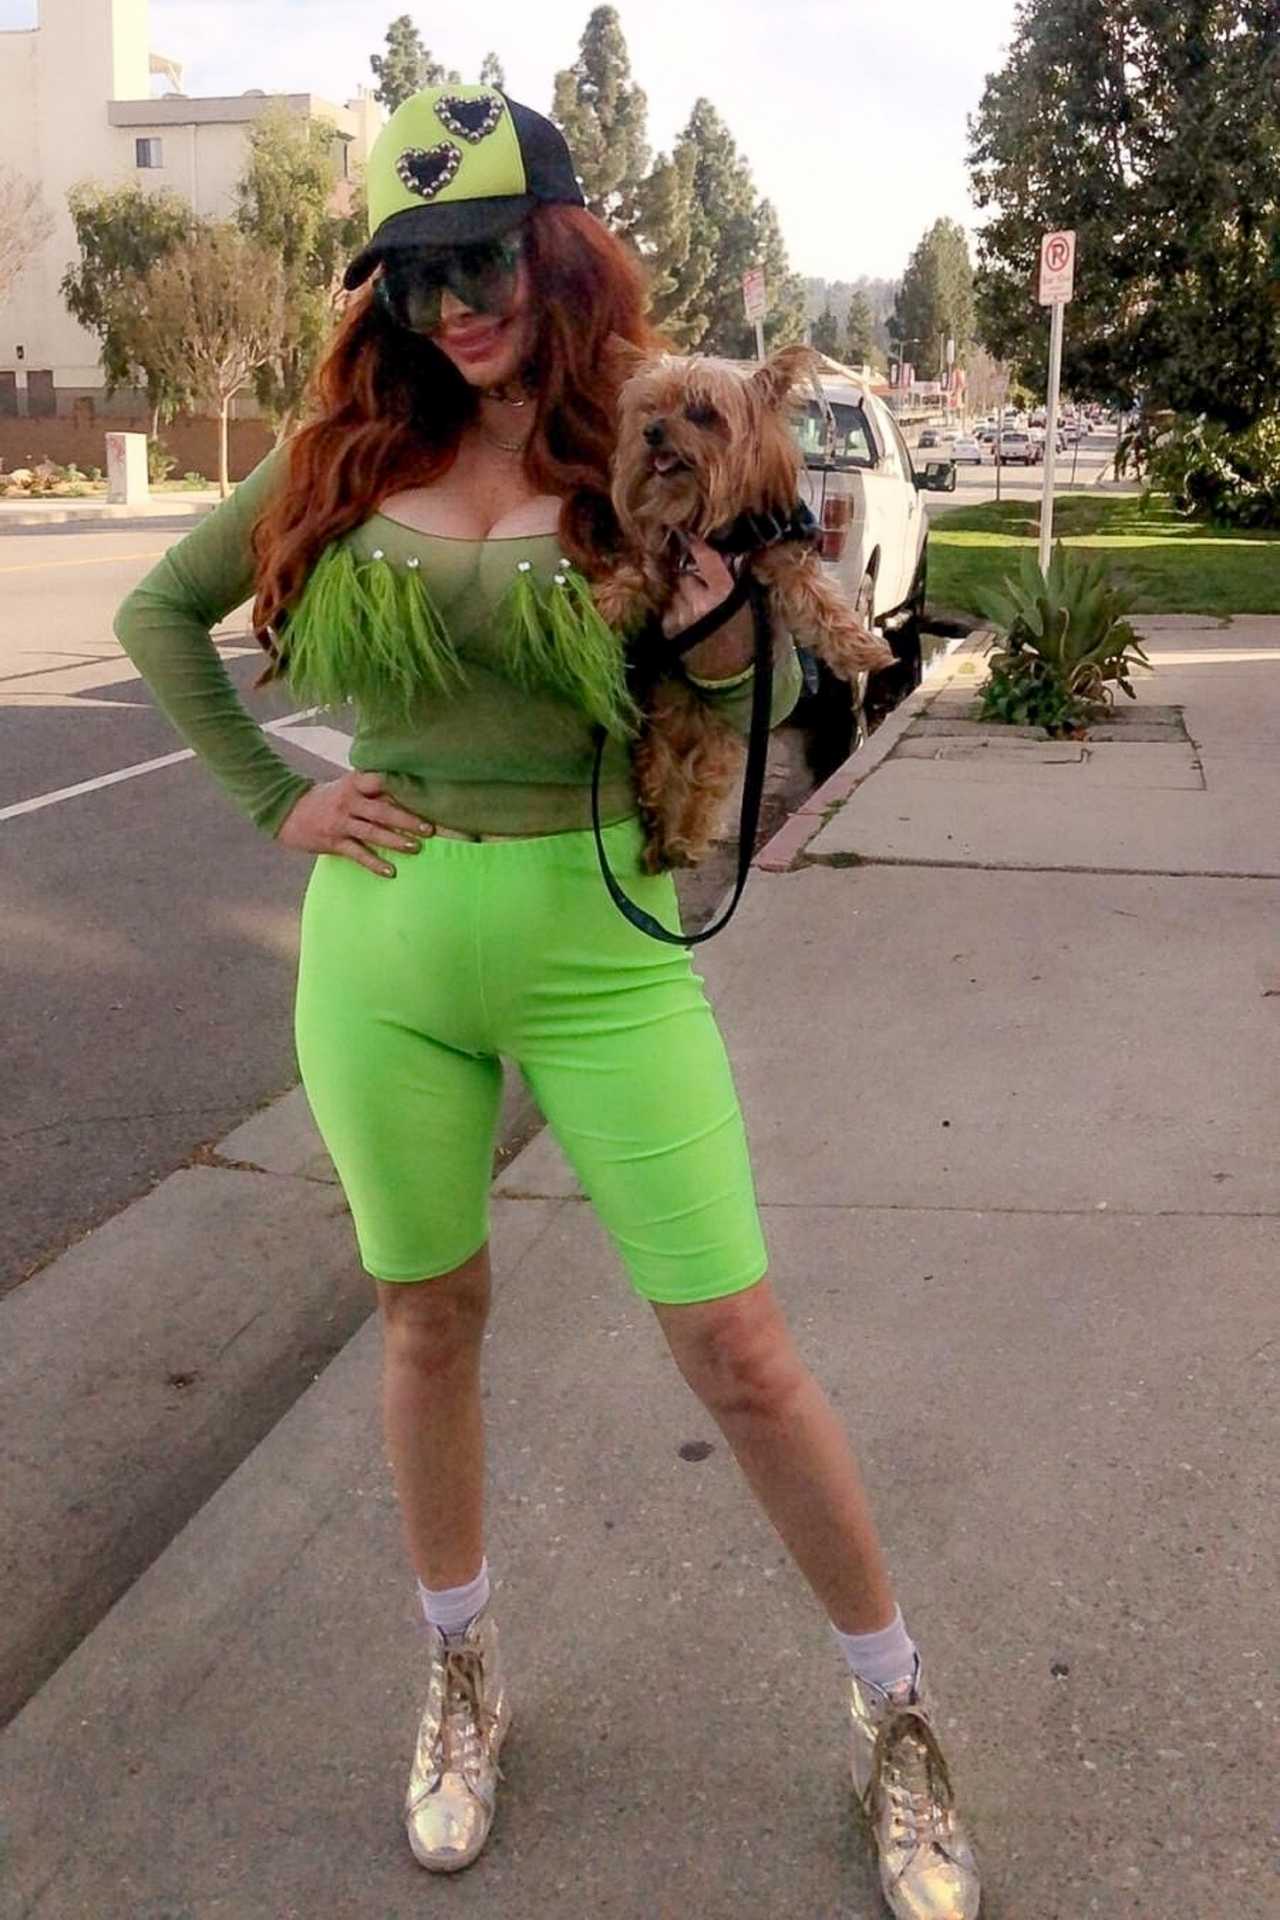 Phoebe Price â€“ In a neon green look while out walking her dog in Beverly Hills